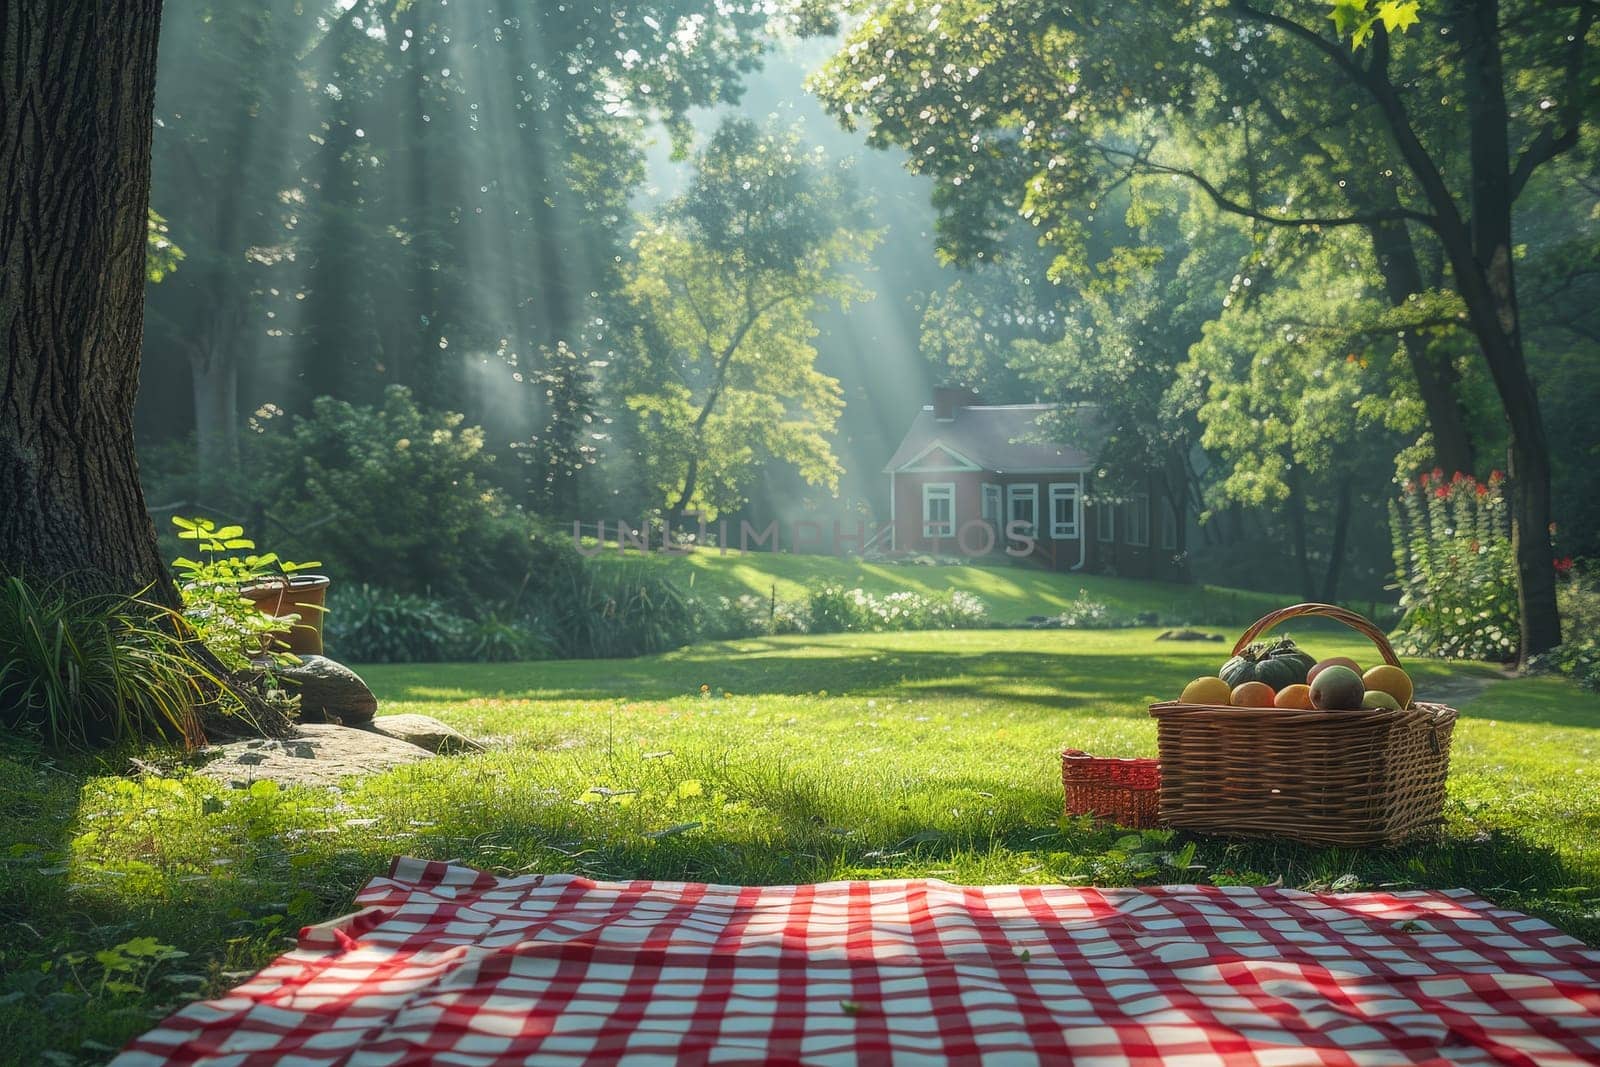 Red and white checkered blanket on the green grass, A picnic scene on a sunny day.